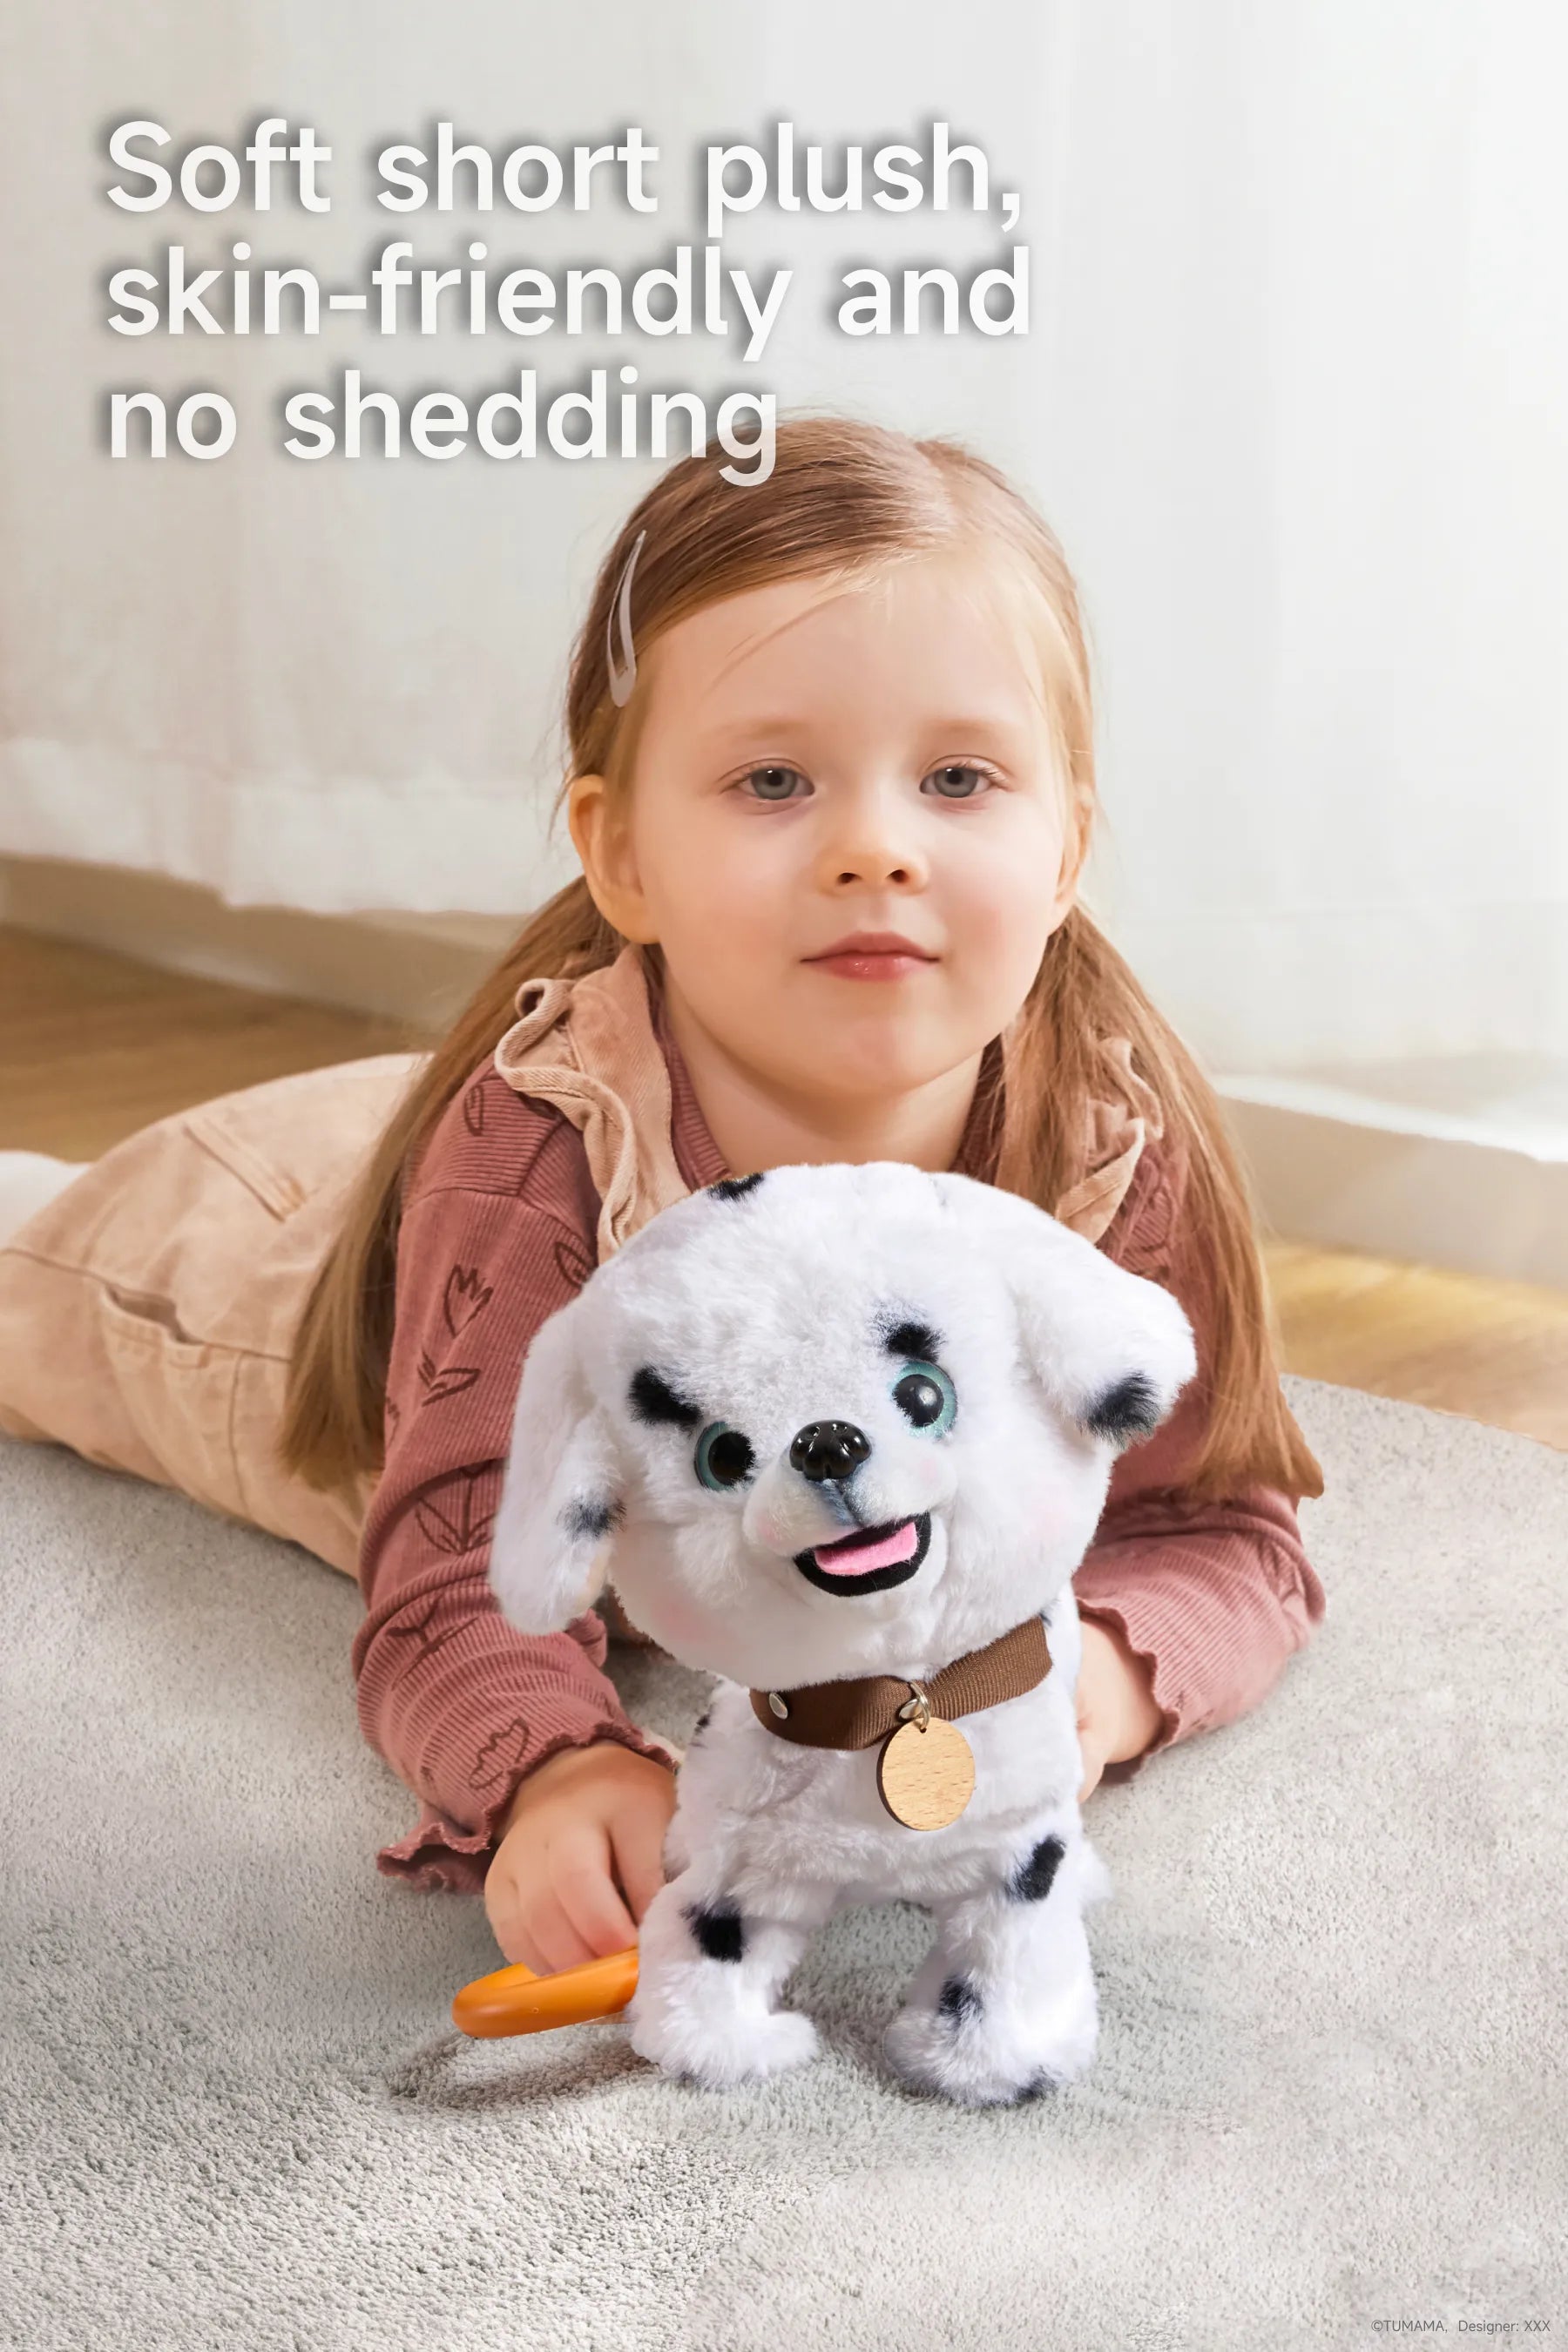 Remote and voice control for walking barking toy dog